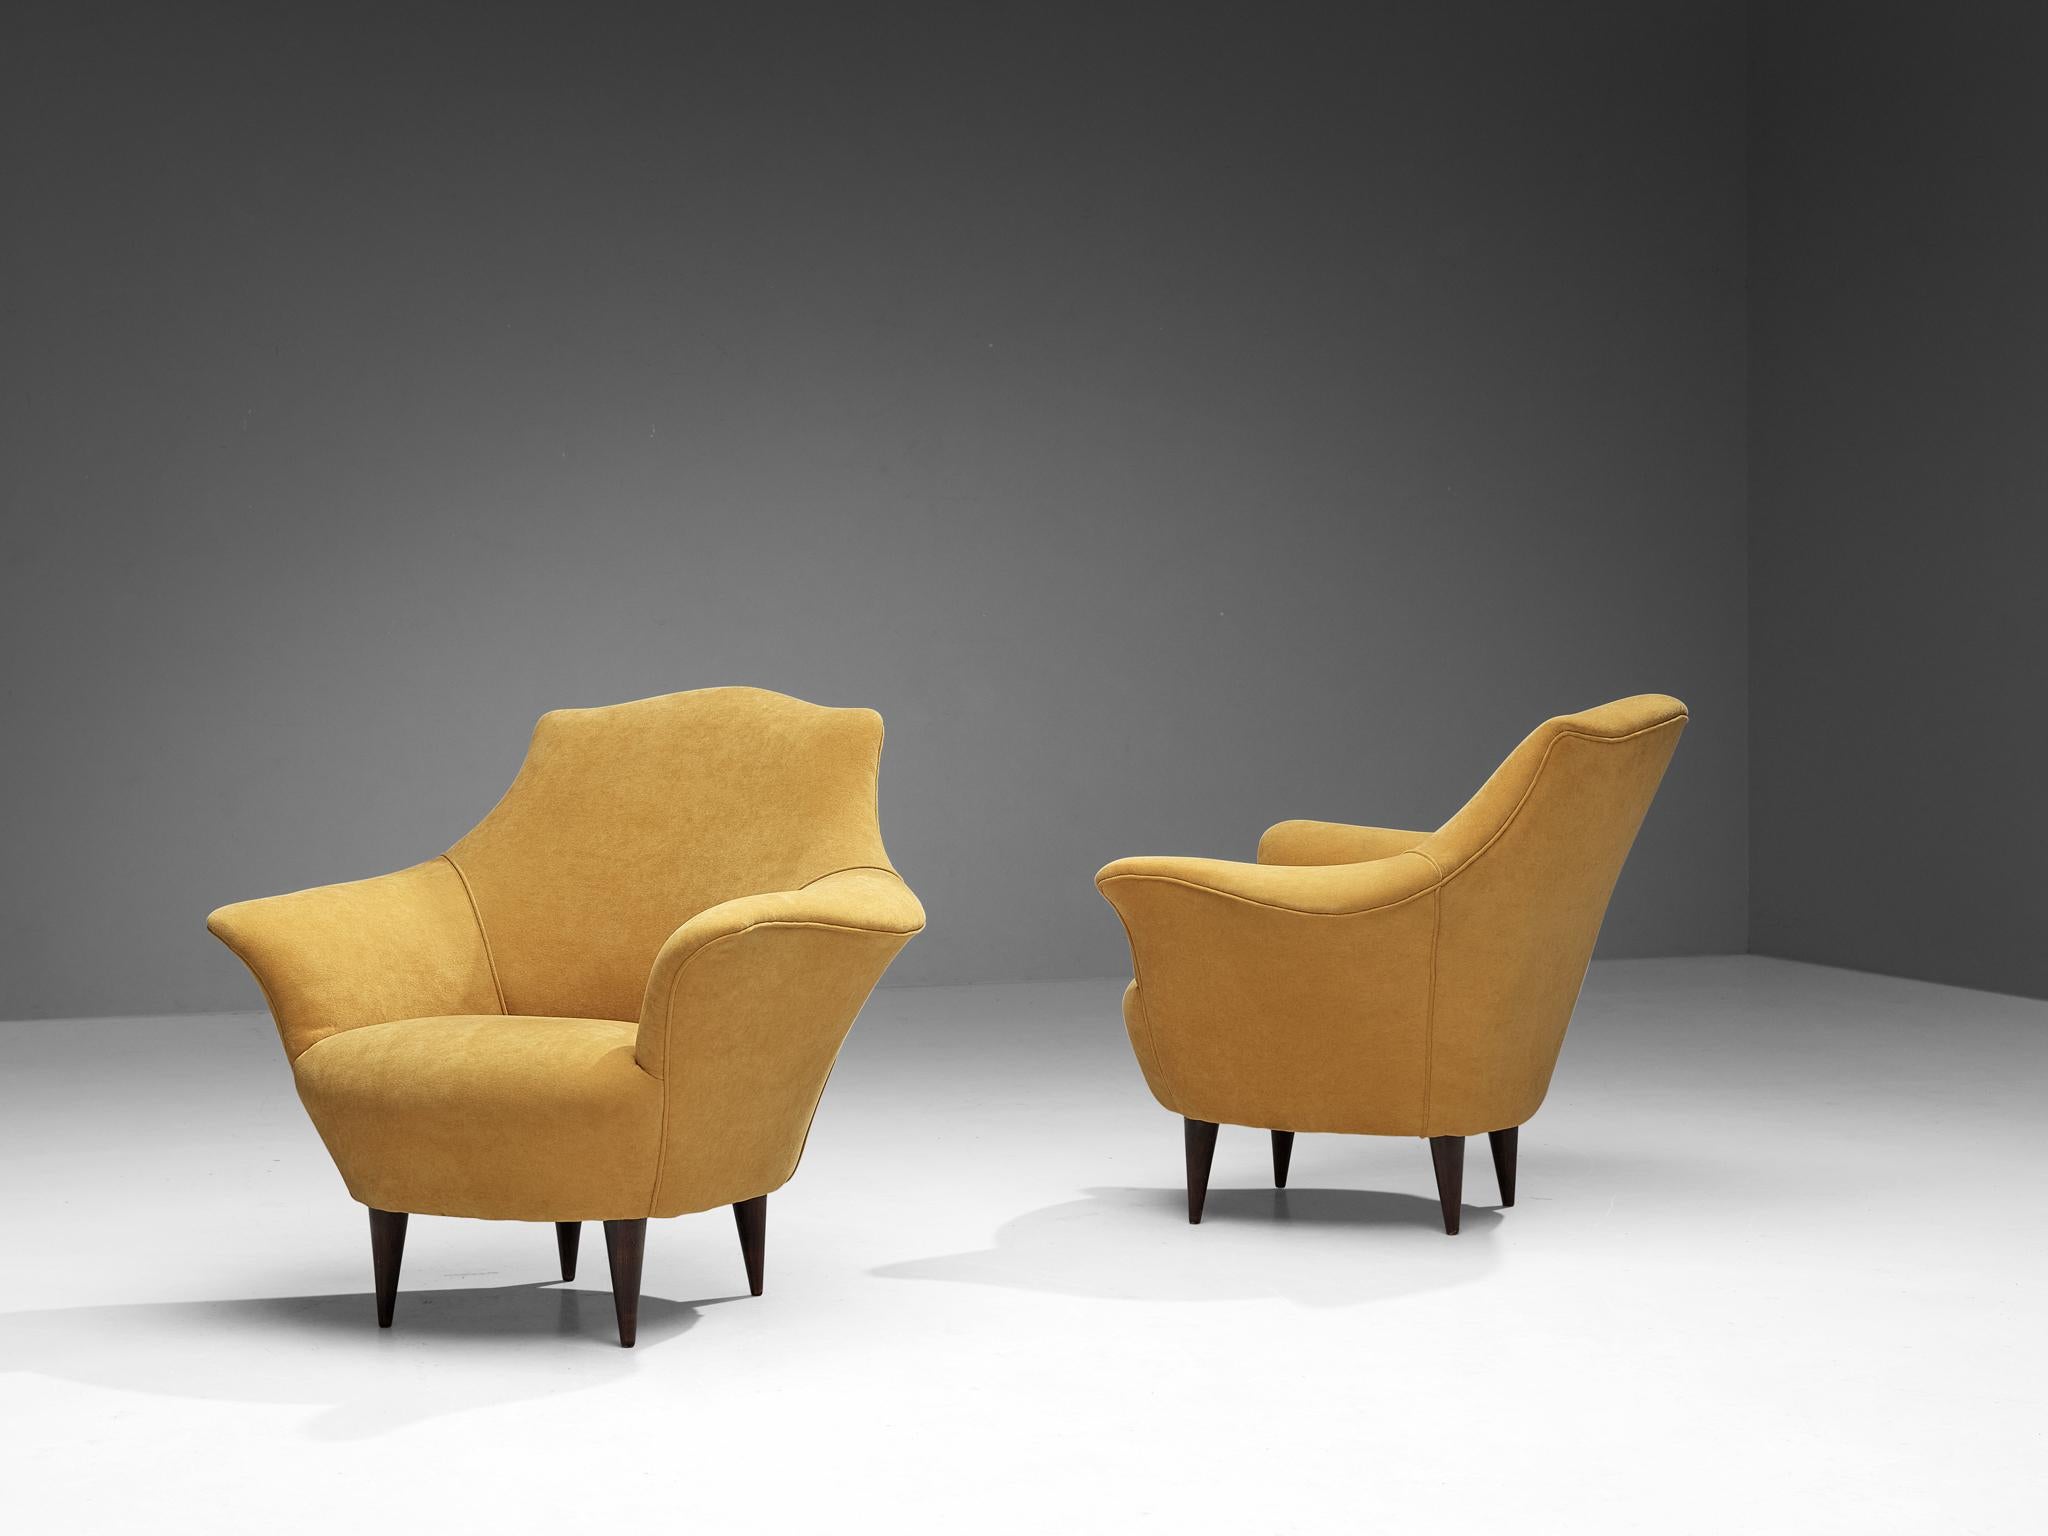 Pair of club chairs, velvet, stained ash, Italy, 1950s.

This lovely pair of Italian lounge chairs is characterized by a sophisticated aesthetic due to its curvaceous lines and round edges. The seating area is supported by sleek outward-facing legs